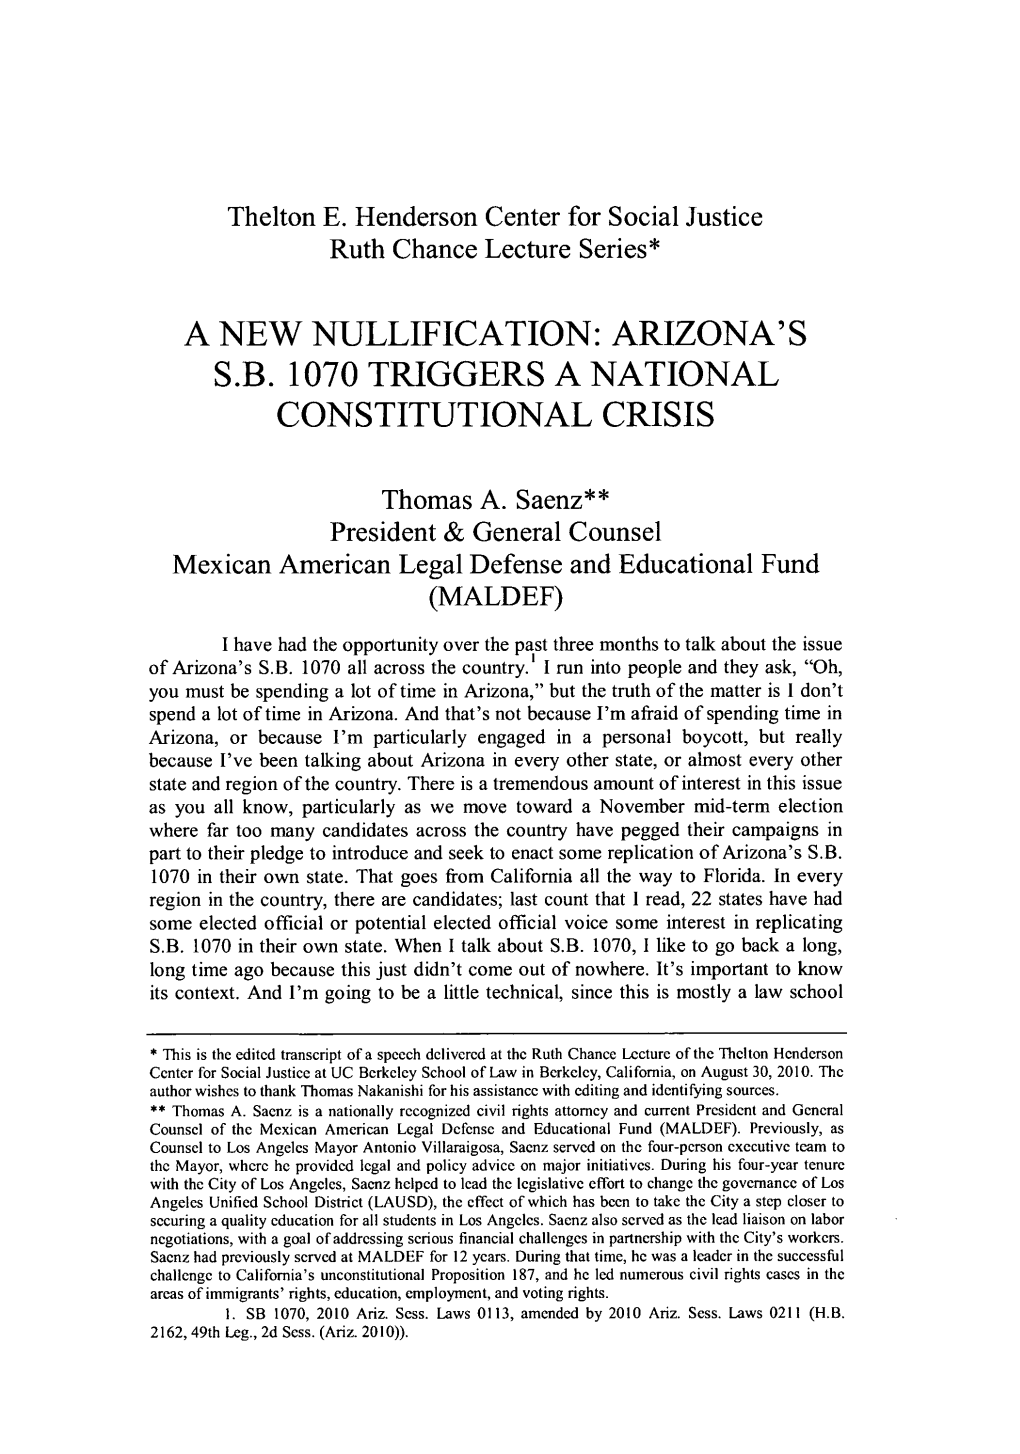 Arizona's Sb 1070 Triggers a National Constitutional